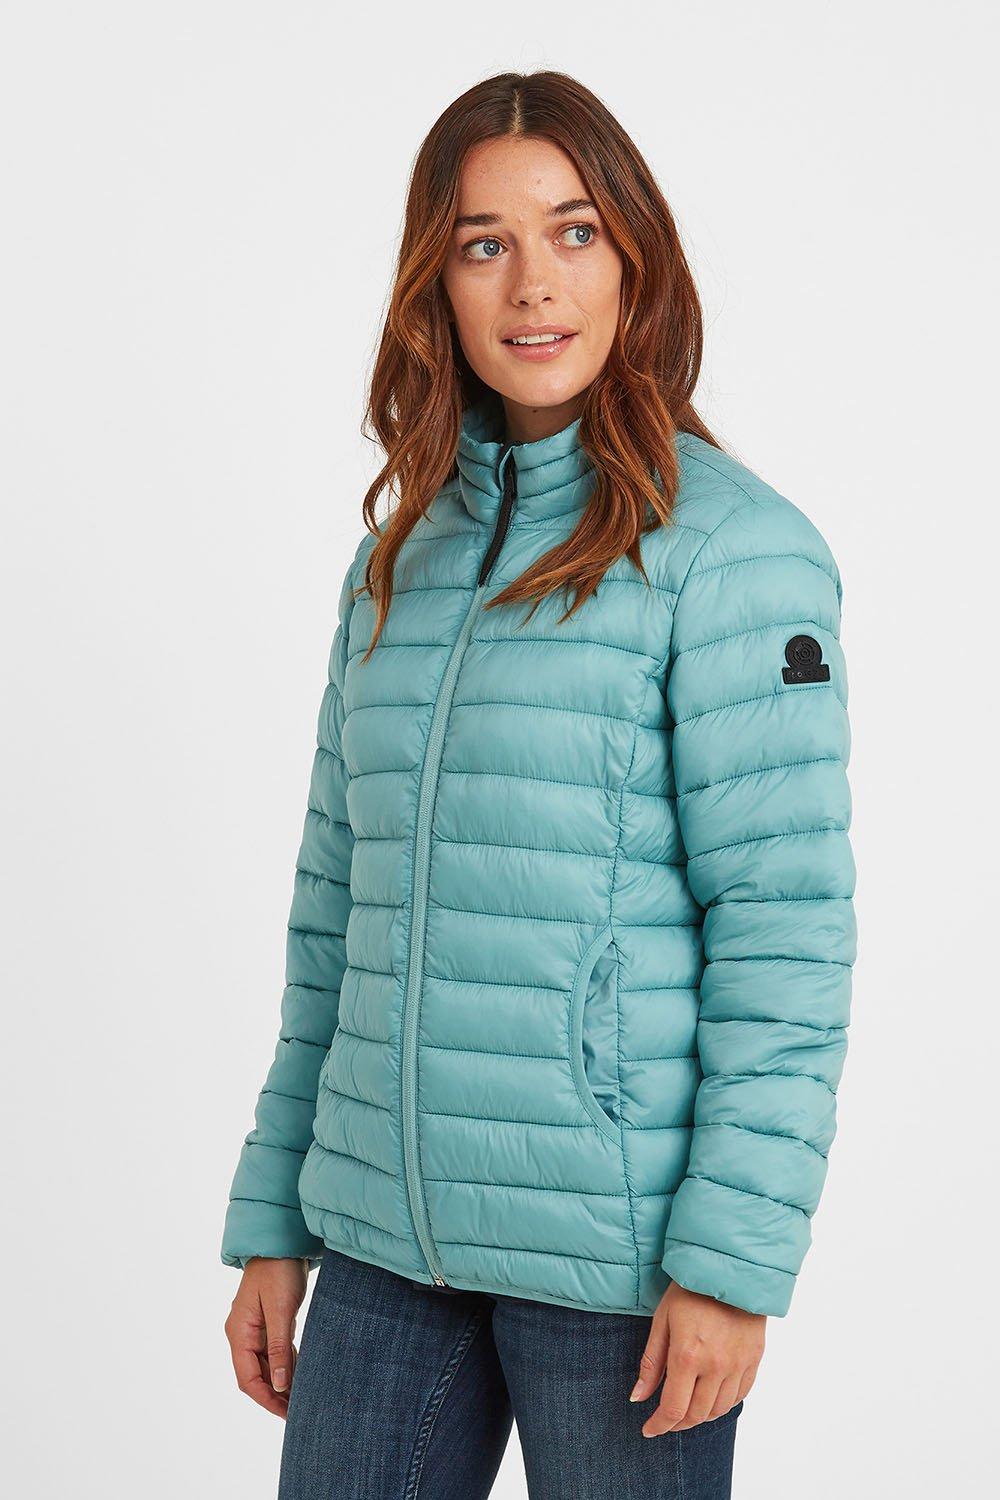 Dorothy Perkins Womens Teal Jaquard Short Padded Jacket Quilted